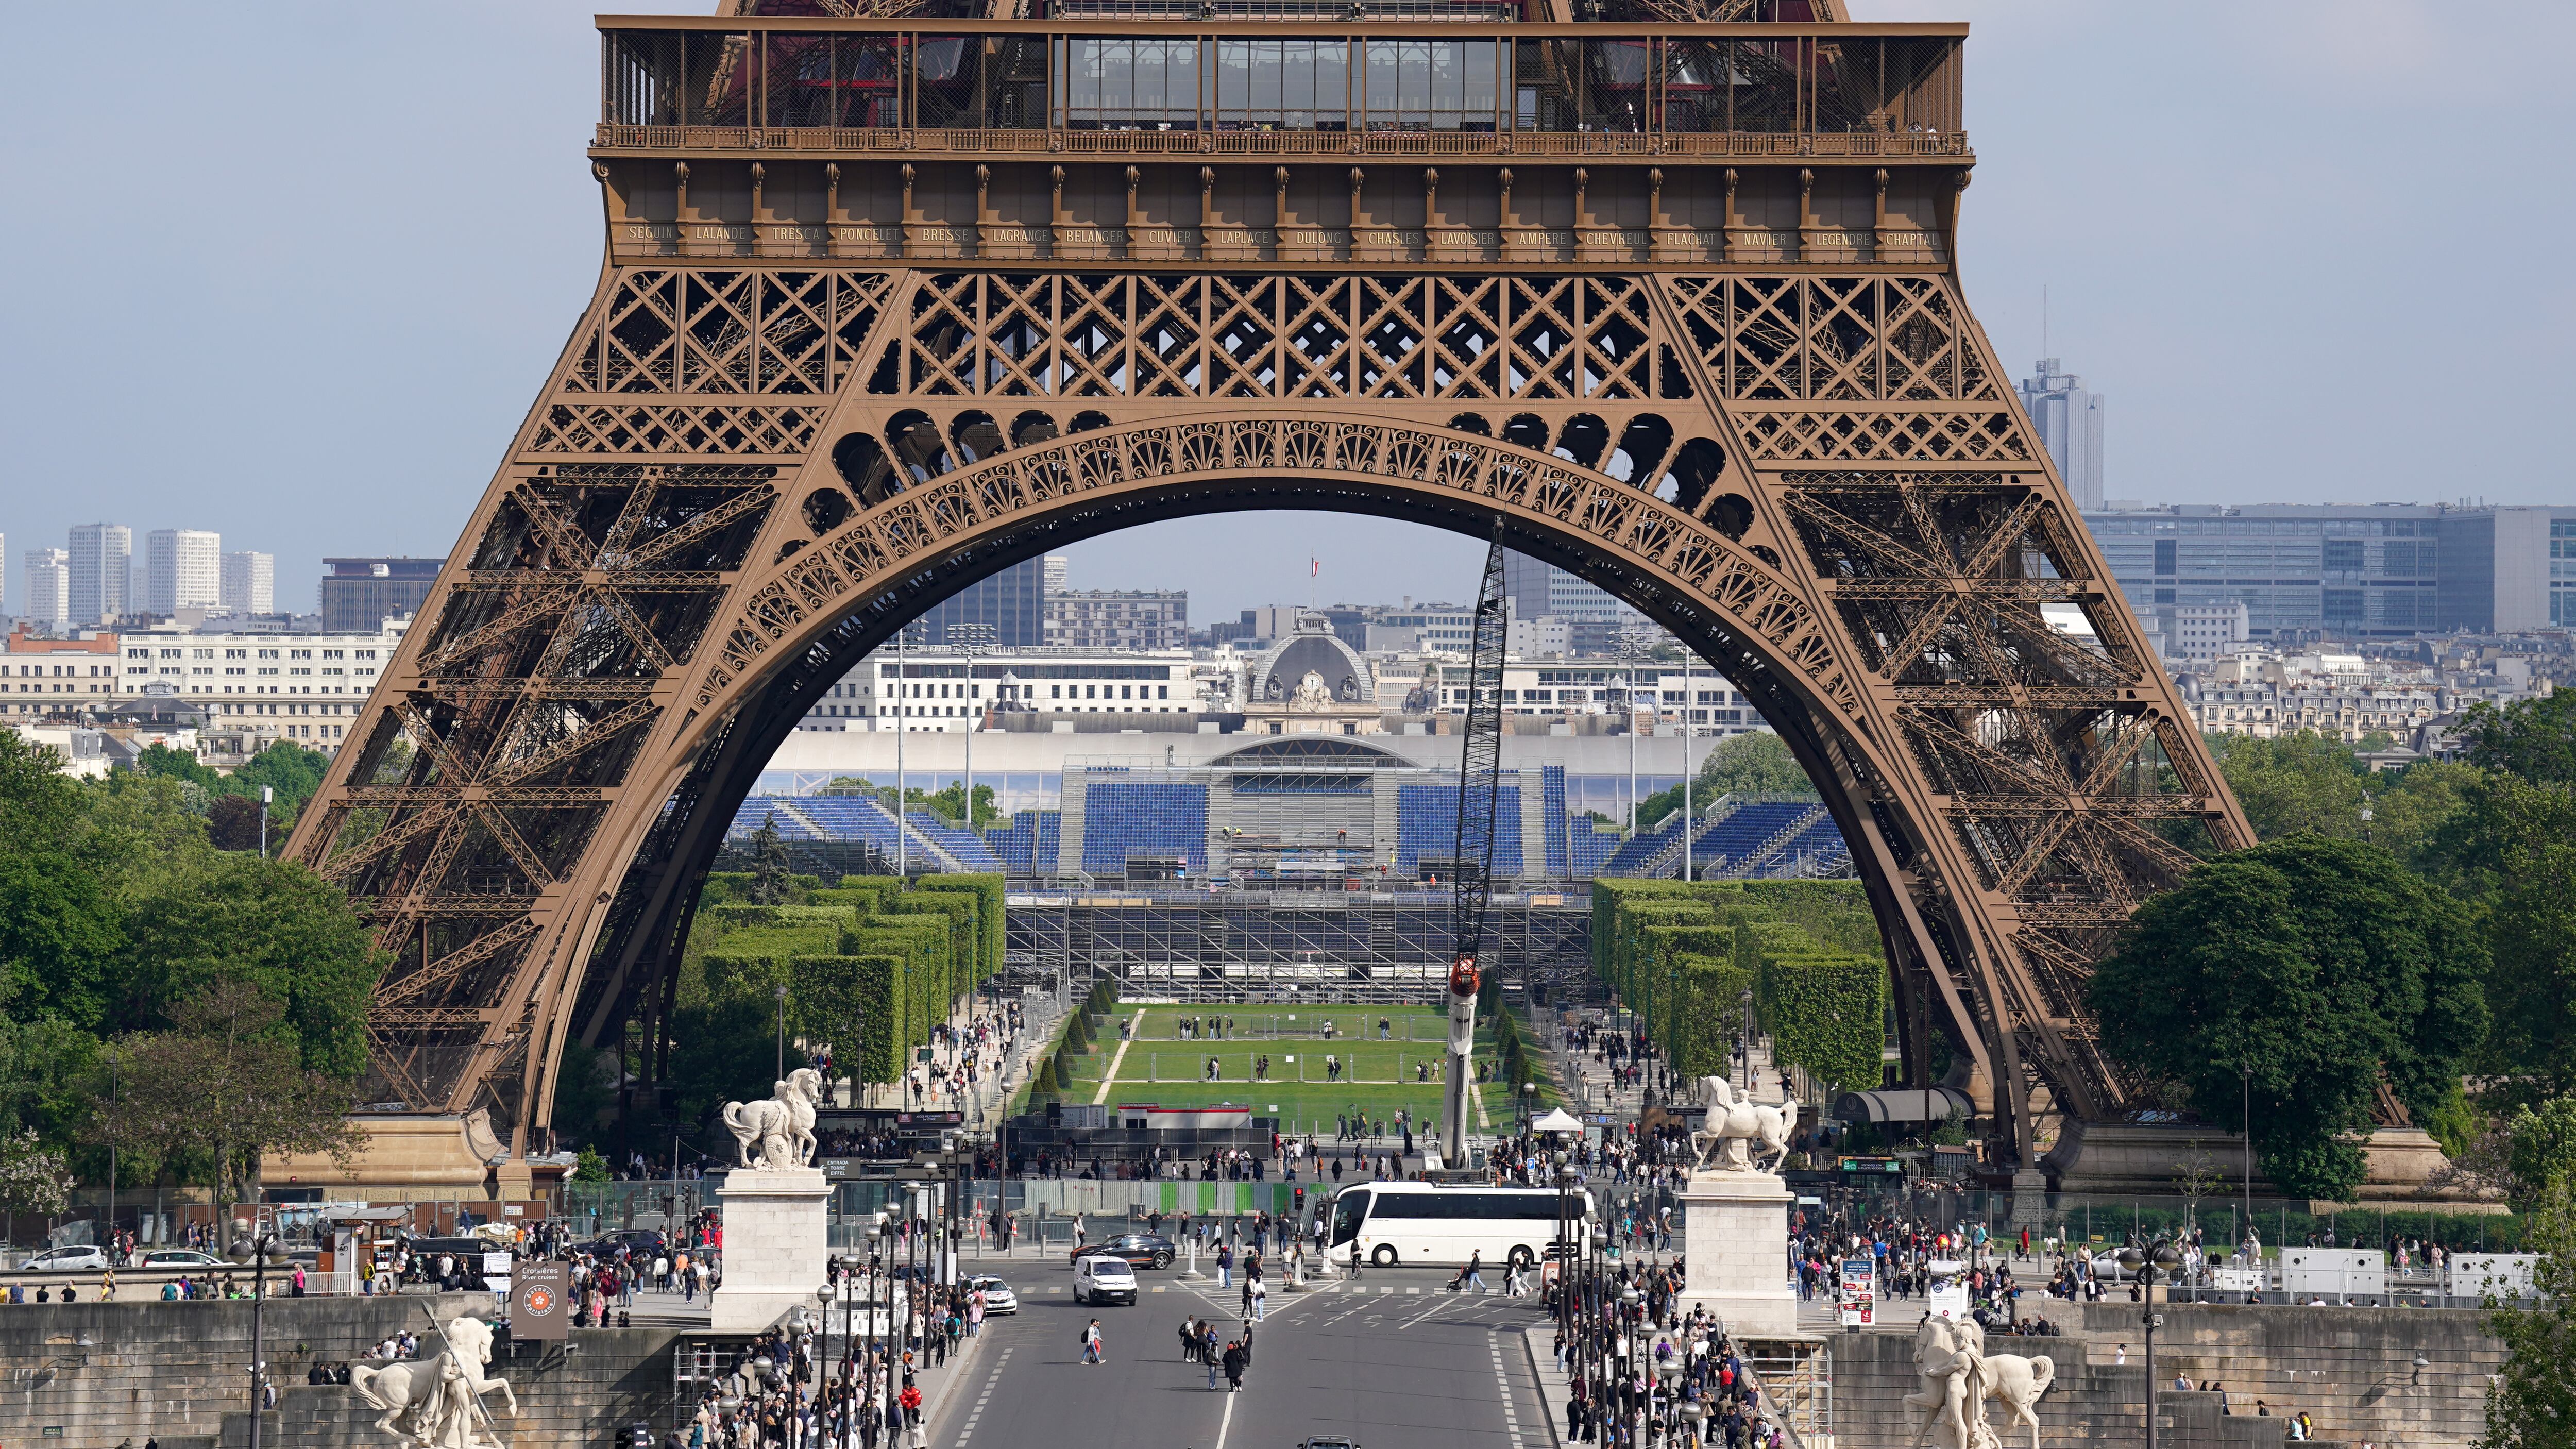 A general view of construction work near the Eiffel Tower, Paris, in preparation for the Paris Olympic Games which will start on July 26